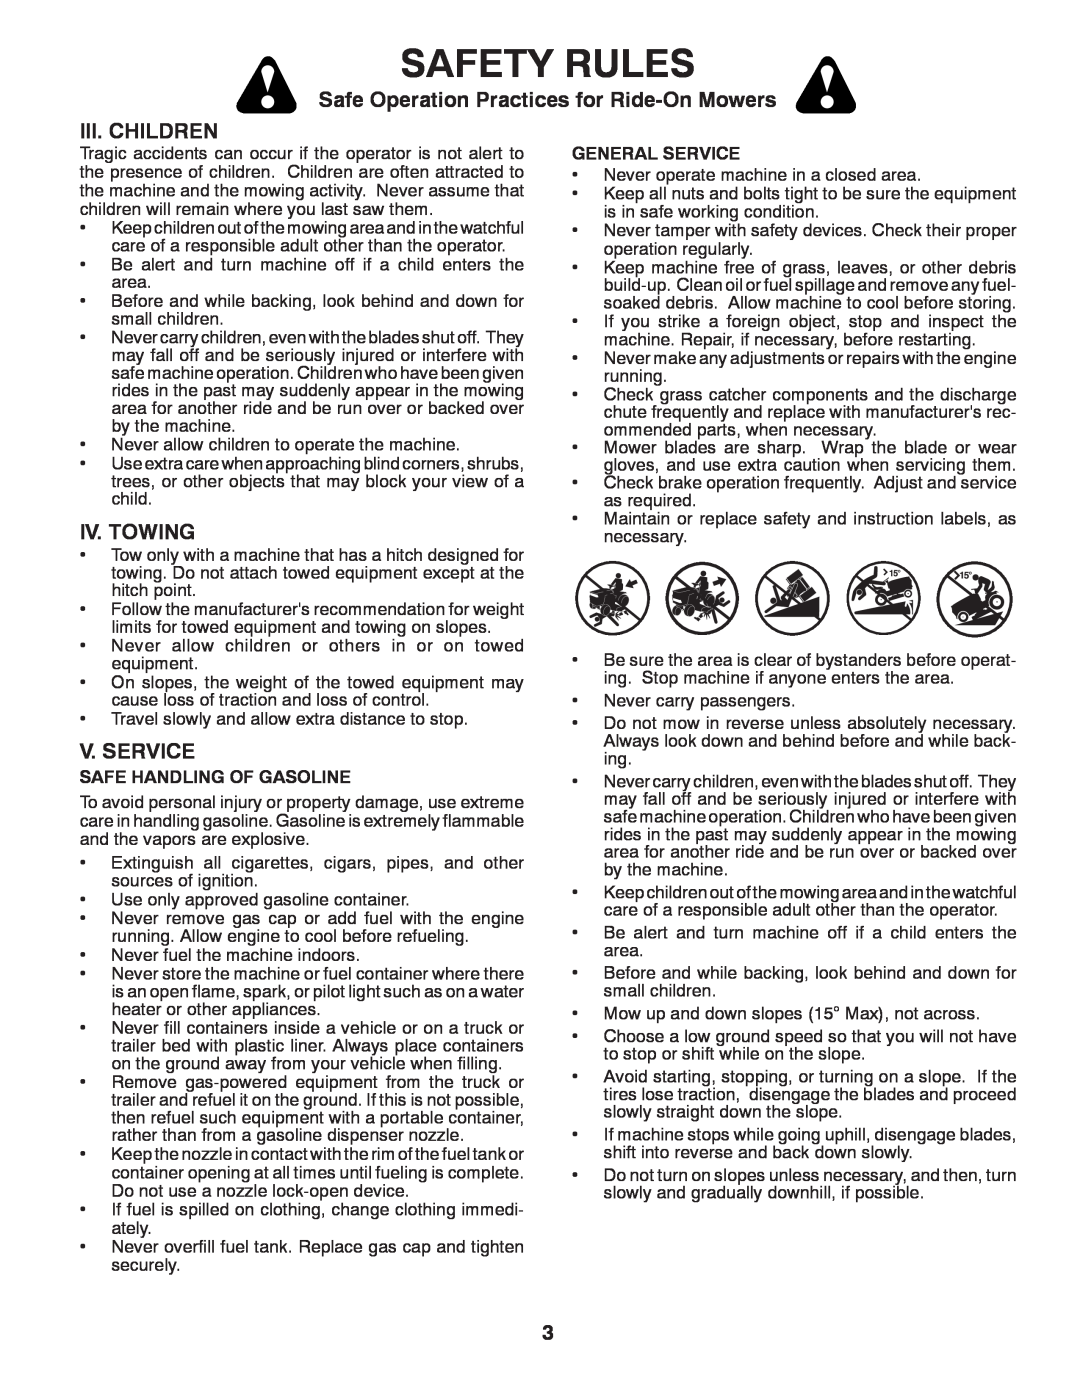 Husqvarna YTH2242 Iii. Children, Iv. Towing, V. Service, Safety Rules, Safe Operation Practices for Ride-On Mowers 